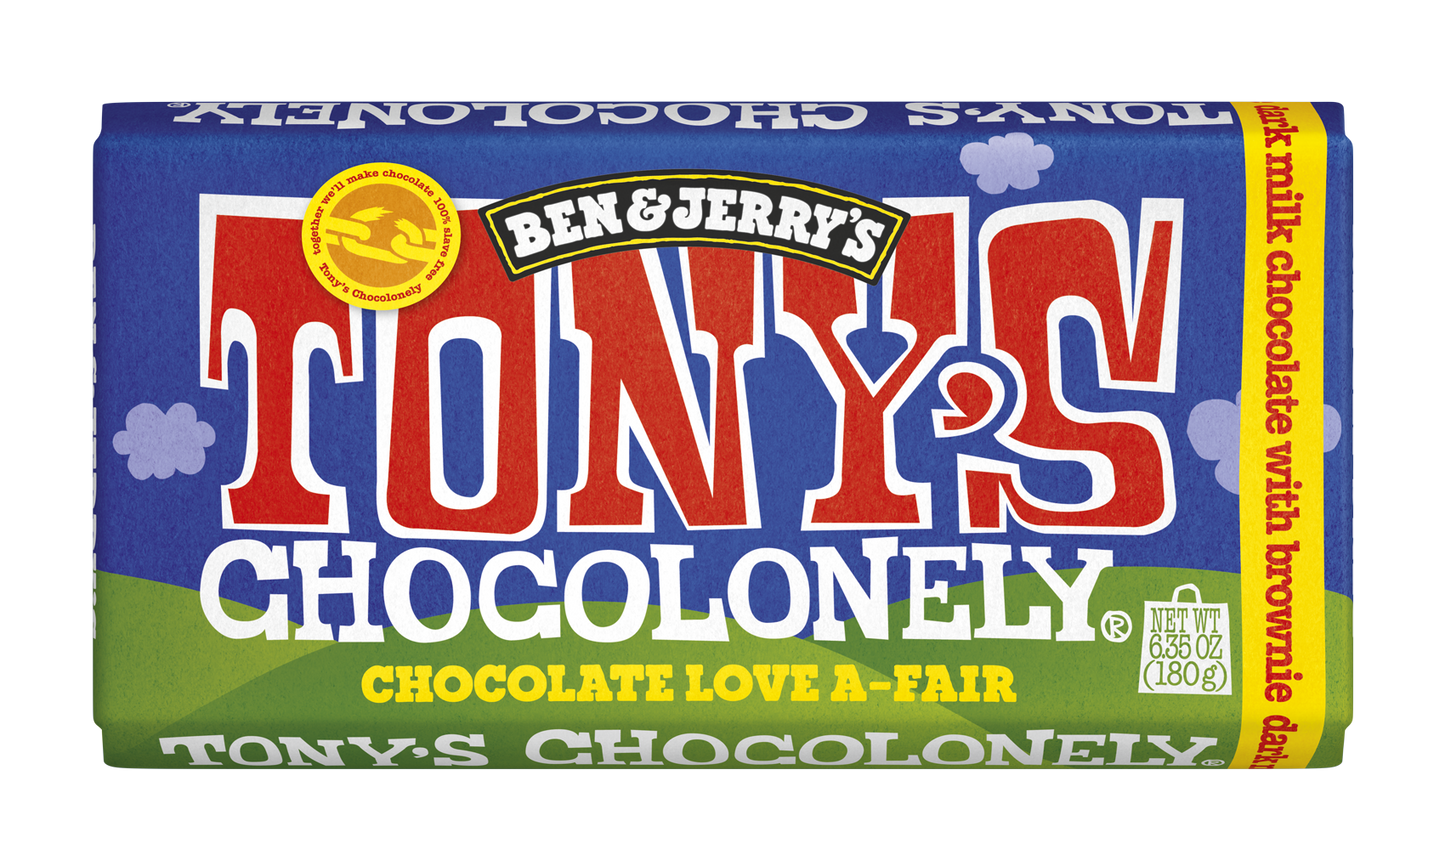 Ben and Jerry's Tony's Chocolonely Chocolate Love A-Fair Dark Milk Chocolate With Brownie - 180g - ULTRA RARE Limited Edition